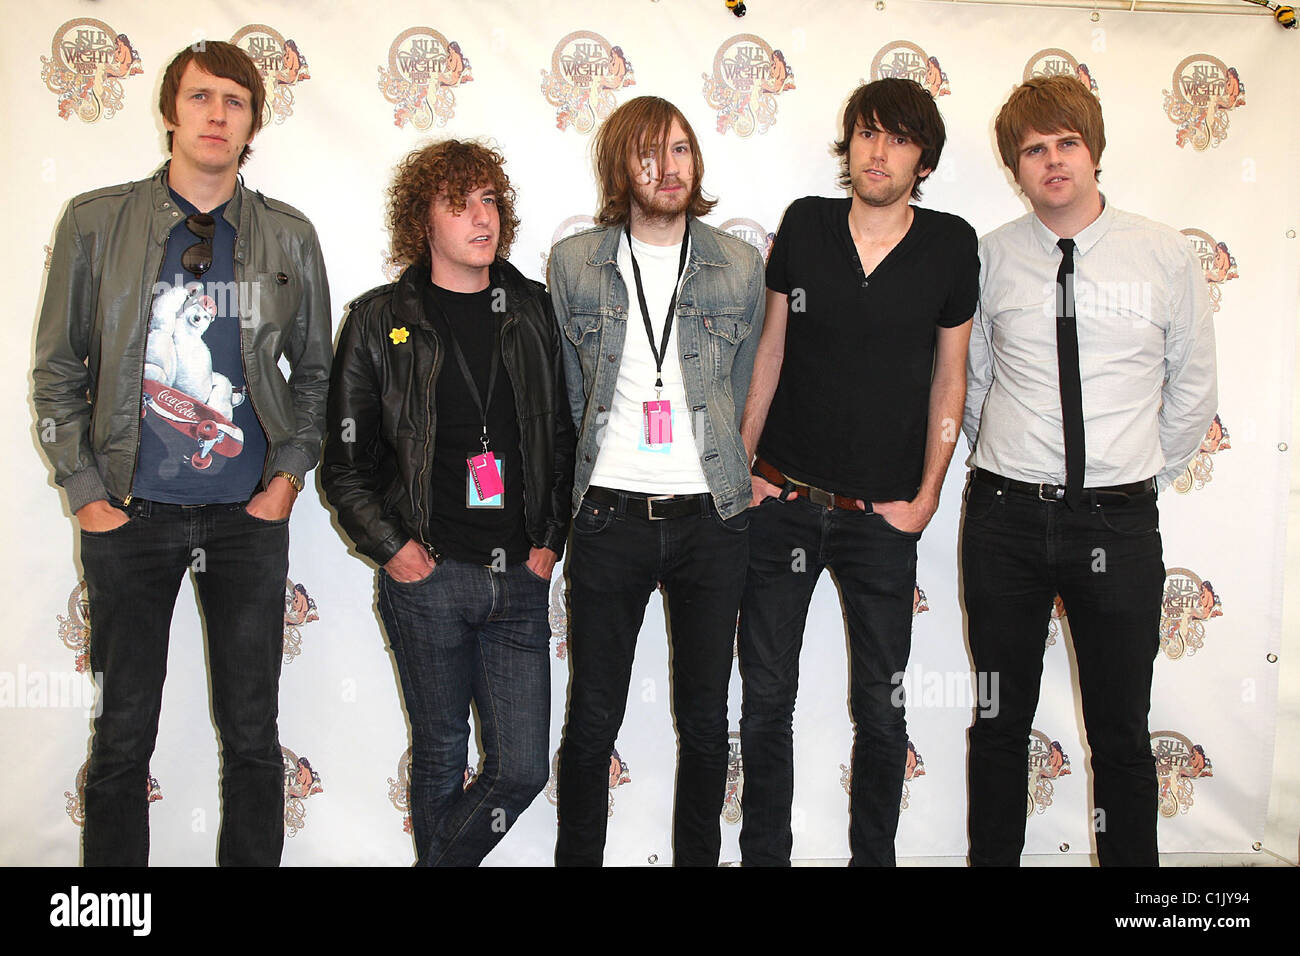 Matt Bowman, Oliver Main, Ryan Wilson, Dave Best, Jimmi Naylor Pigeon Detectives backstage Isle of Wight Music Festival 2009 - Stock Photo